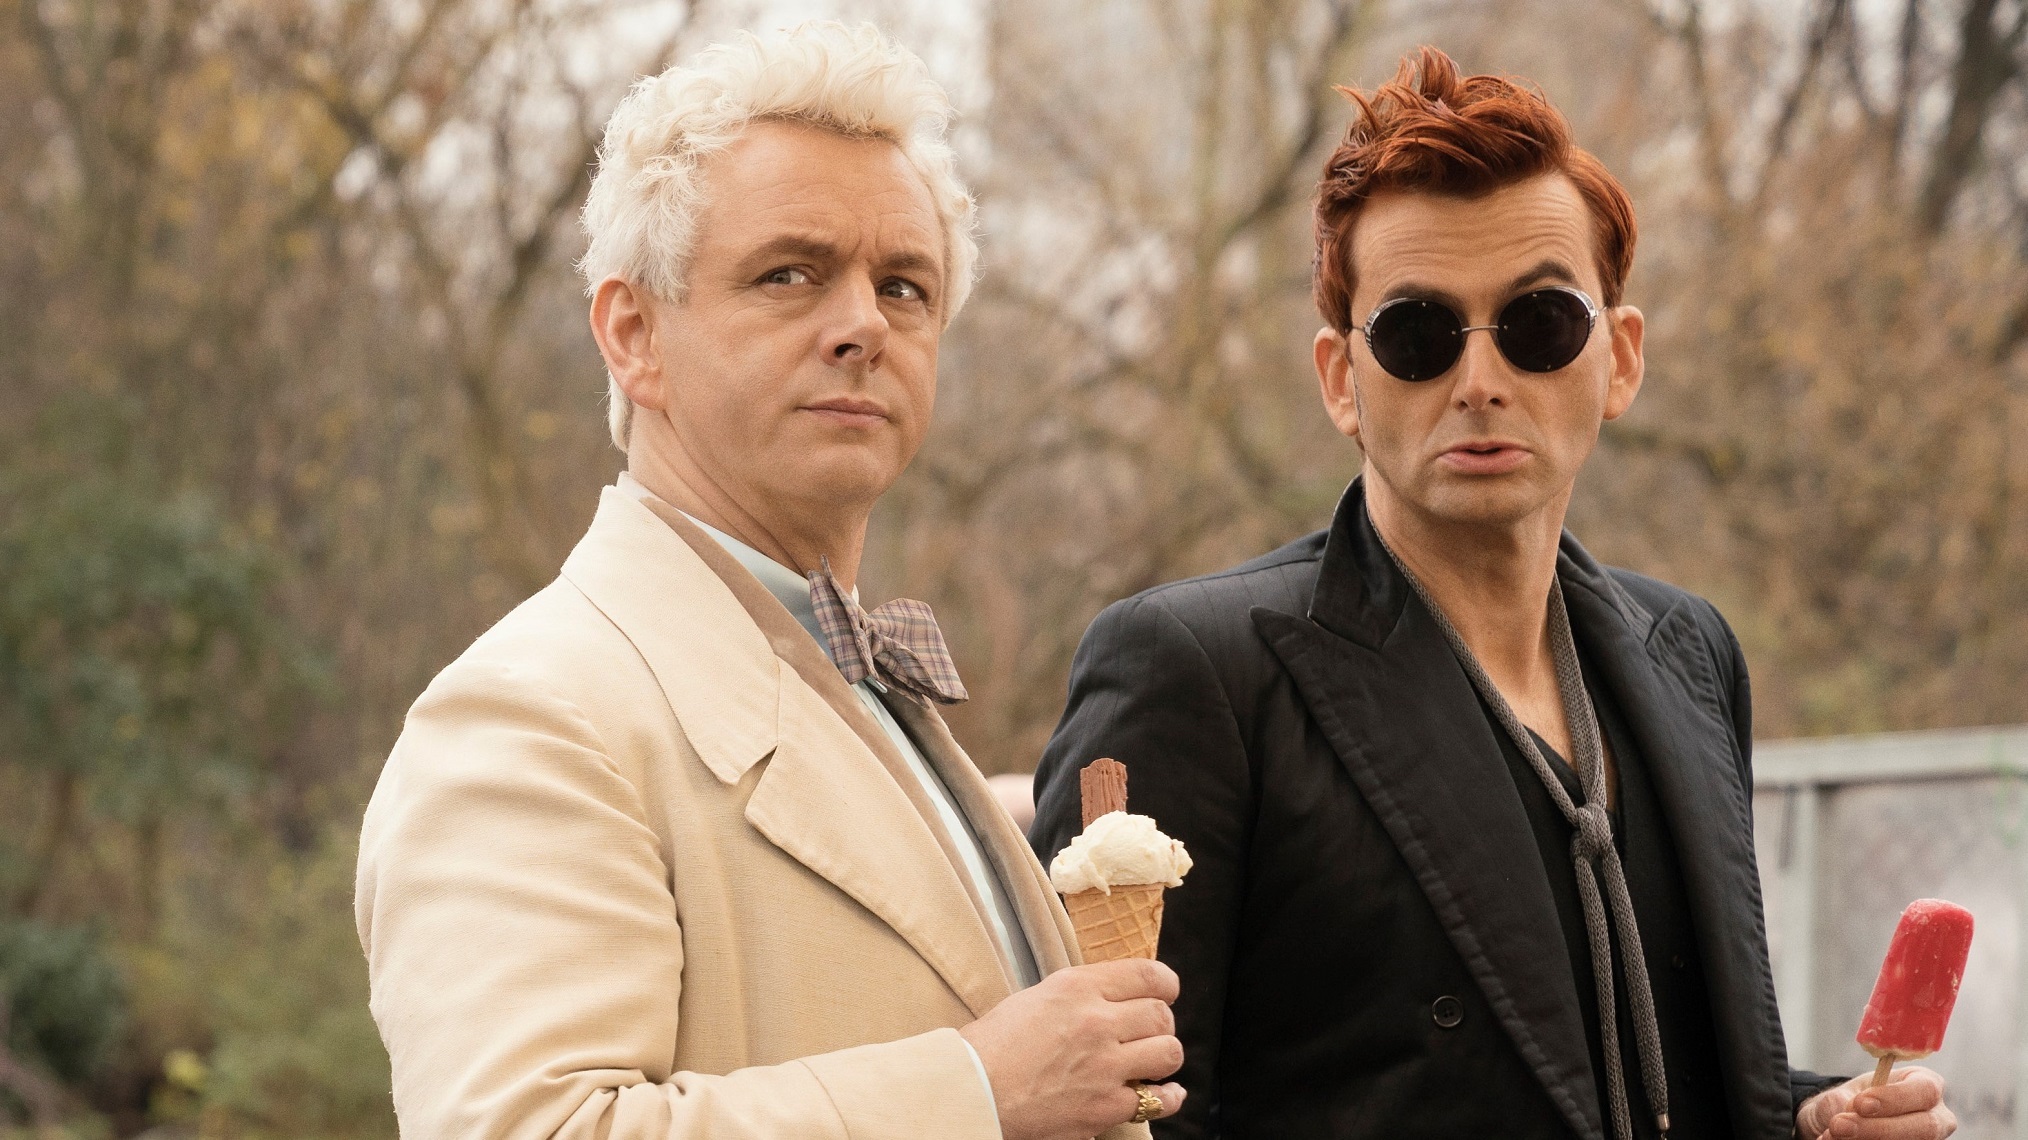 Michael Sheen and David Tenant in Good Omens